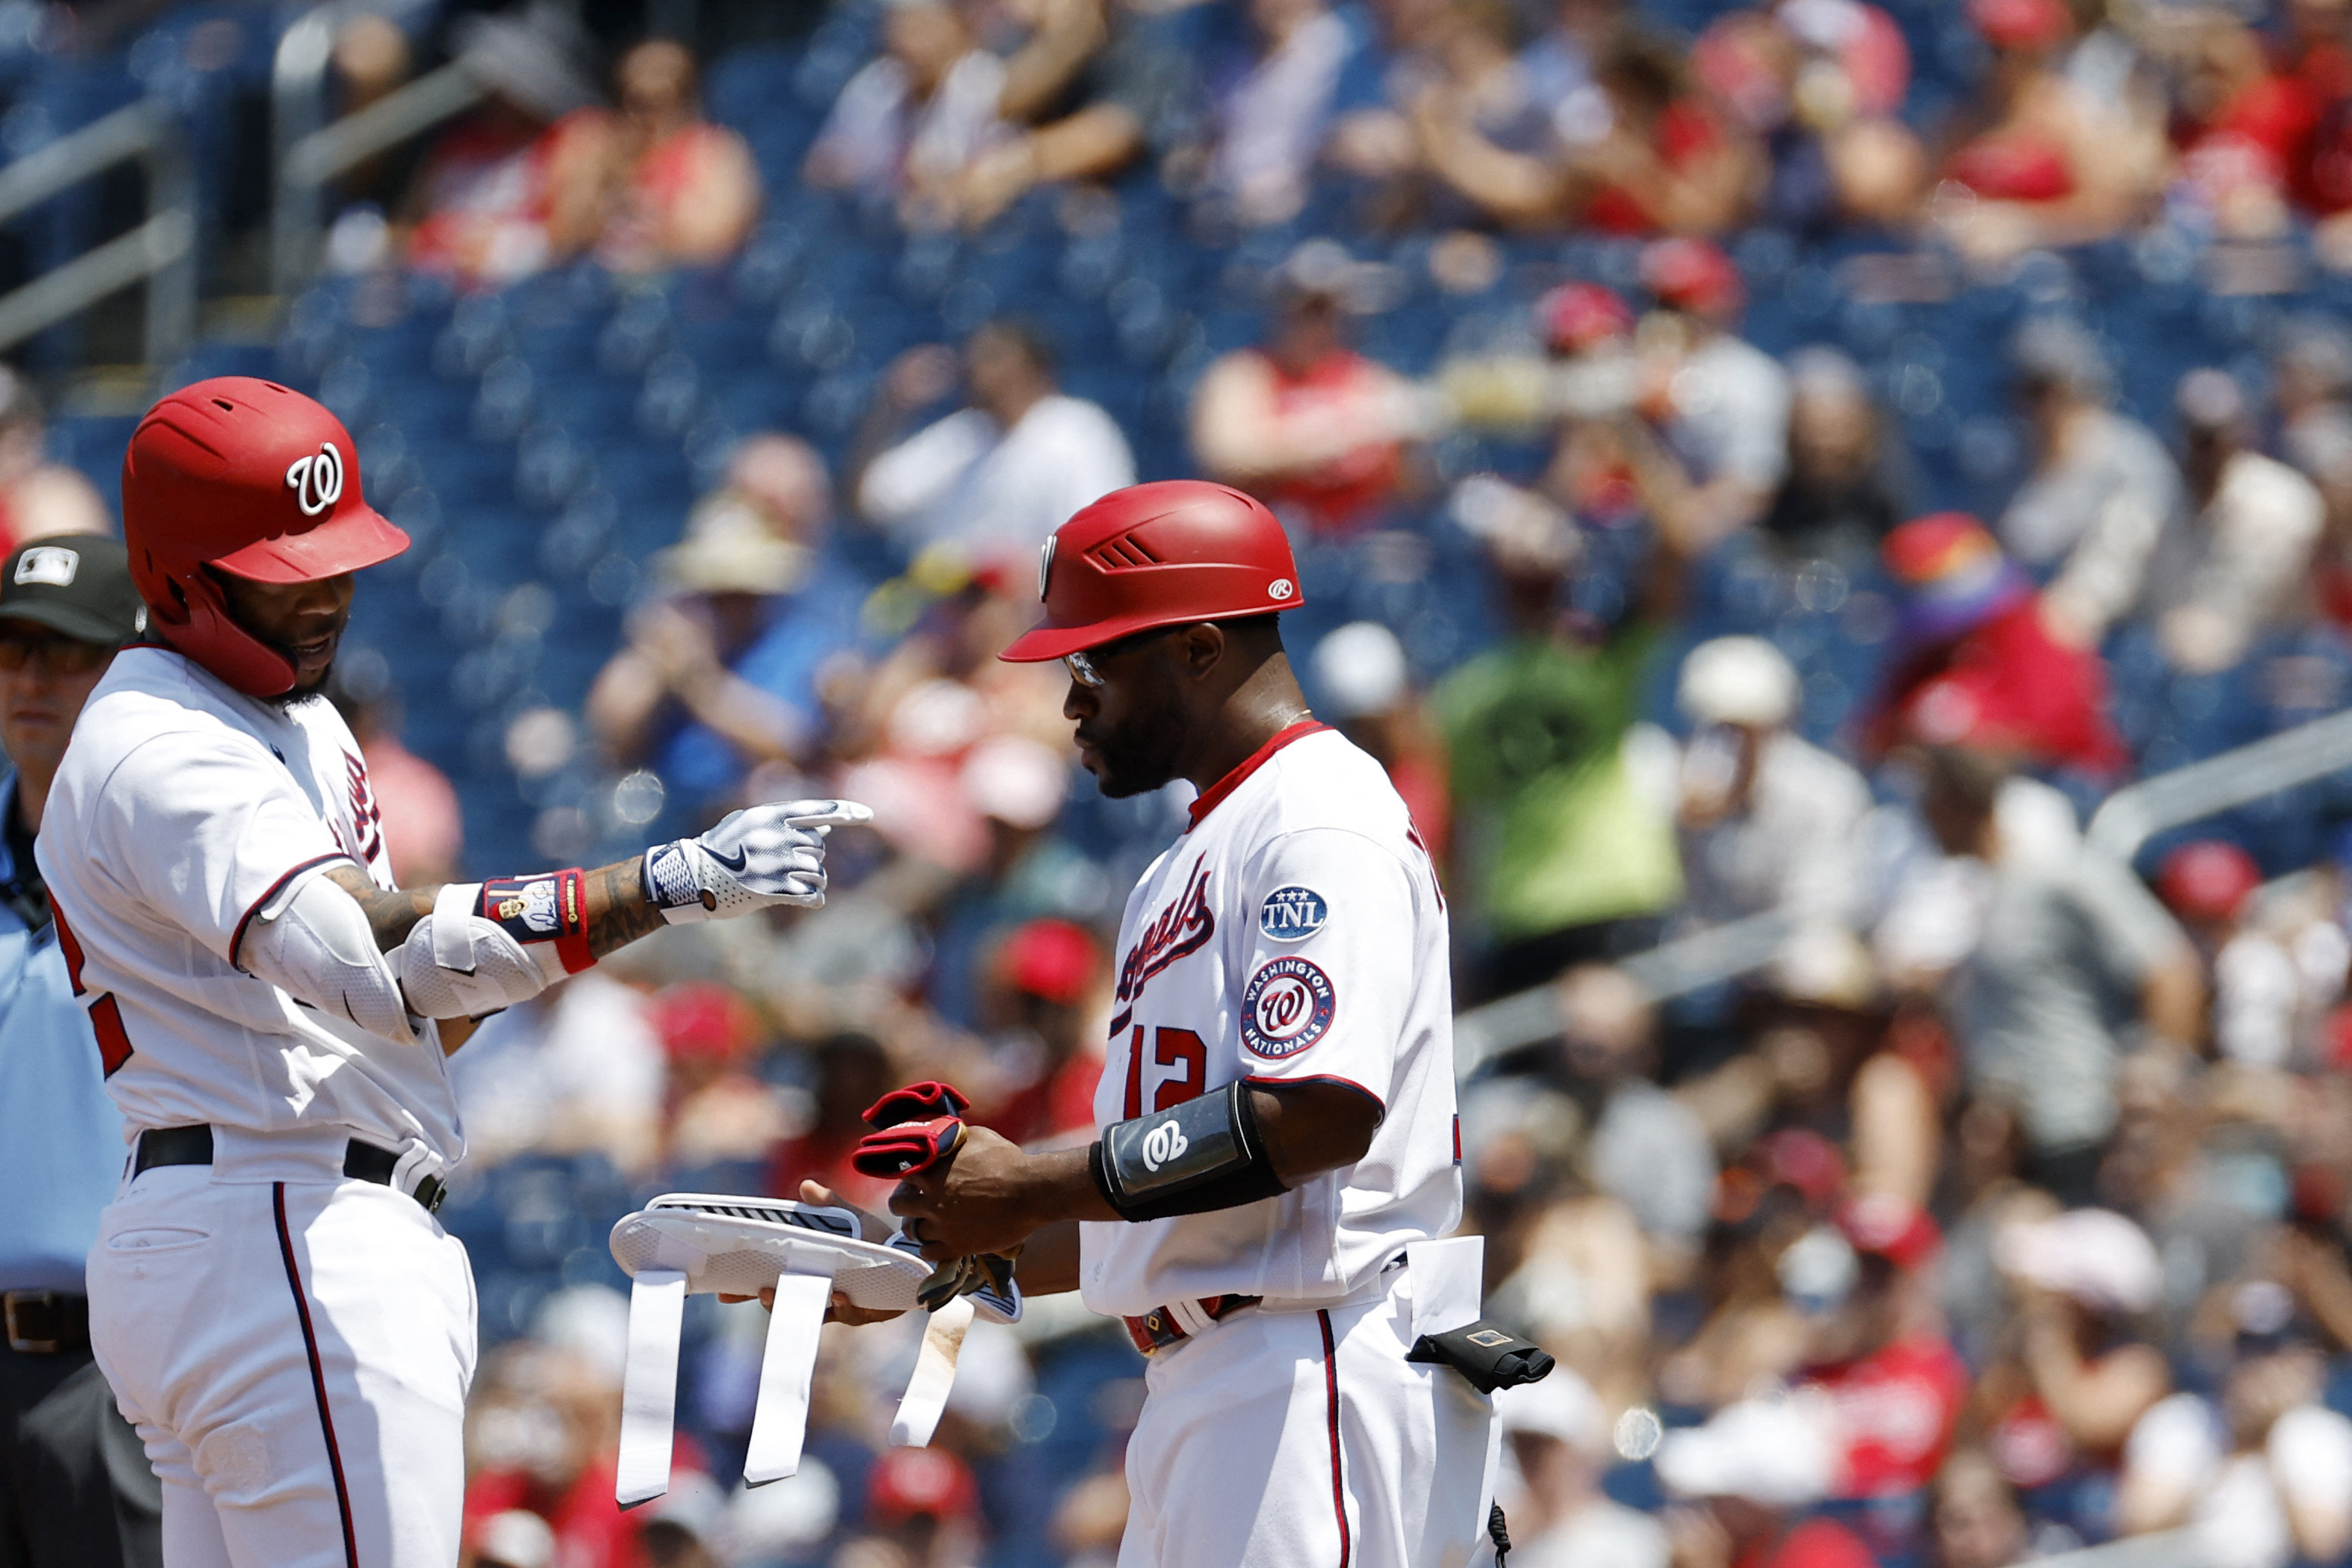 Throwback Nats rally, win 6-5 to sweep Giants - The San Diego Union-Tribune